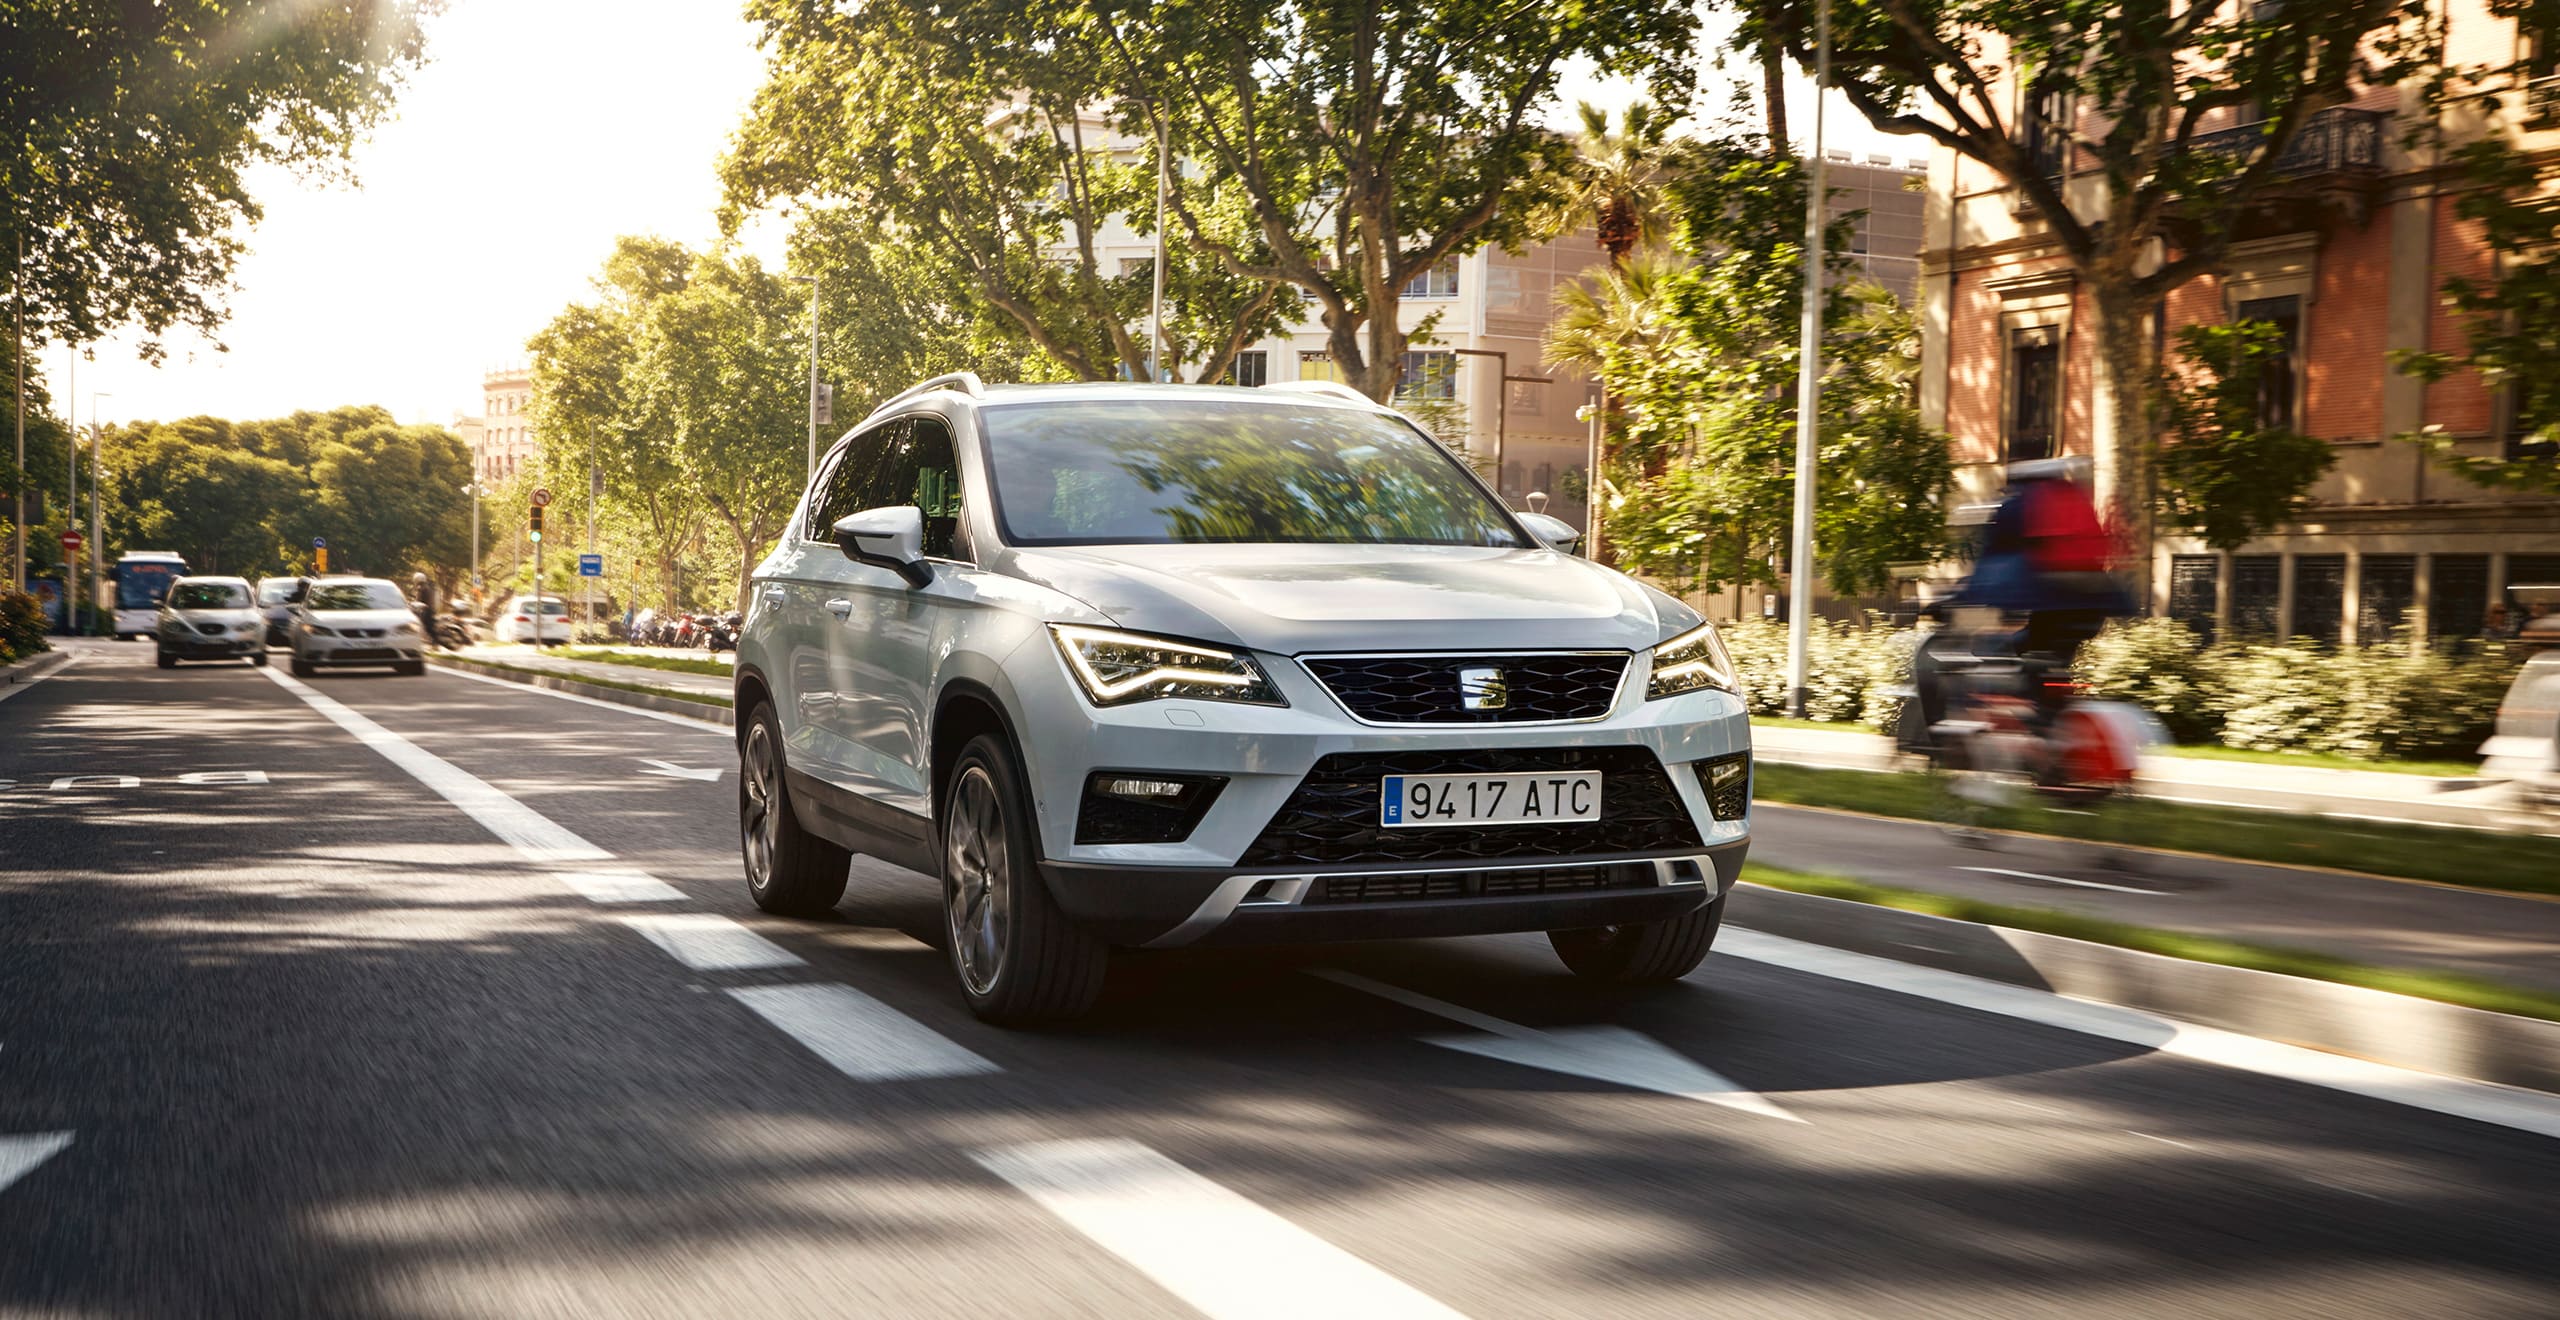 SEAT new car services and maintenance five year warranty – SEAT Ateca SUV driving on a road beside trees